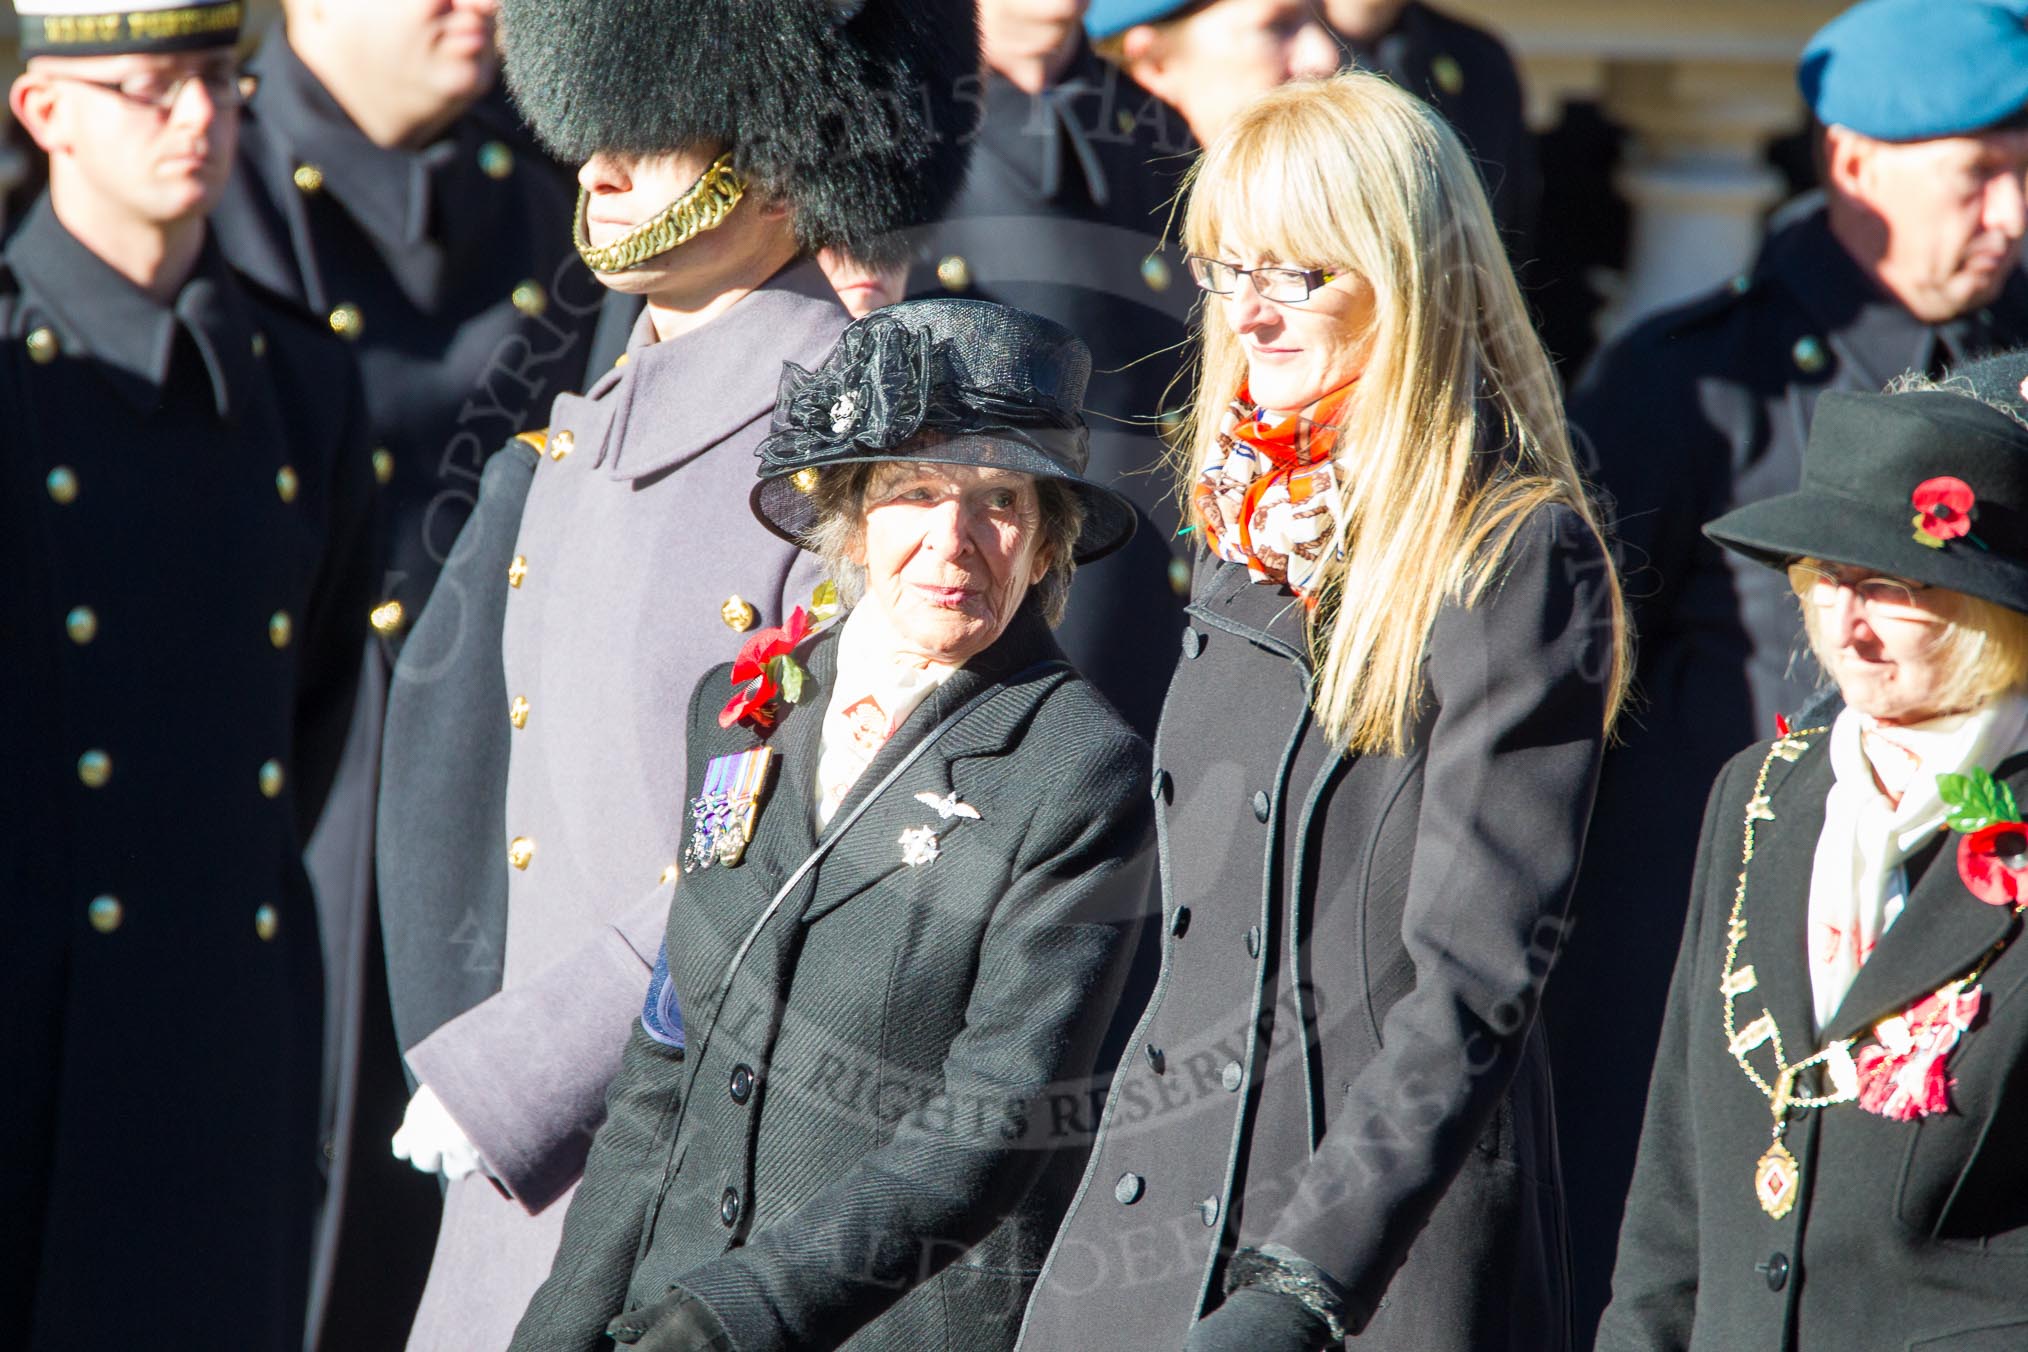 Remembrance Sunday Cenotaph March Past 2013: D1 - War Widows Association. The lady with the long blond hair is Lesley-Ann George-Taylor, Chairman of the Royal Navy and Royal Marines Widows Association. On the left, with the black hat, is the WWA Committee member Marjory Dodson..
Press stand opposite the Foreign Office building, Whitehall, London SW1,
London,
Greater London,
United Kingdom,
on 10 November 2013 at 11:38, image #17